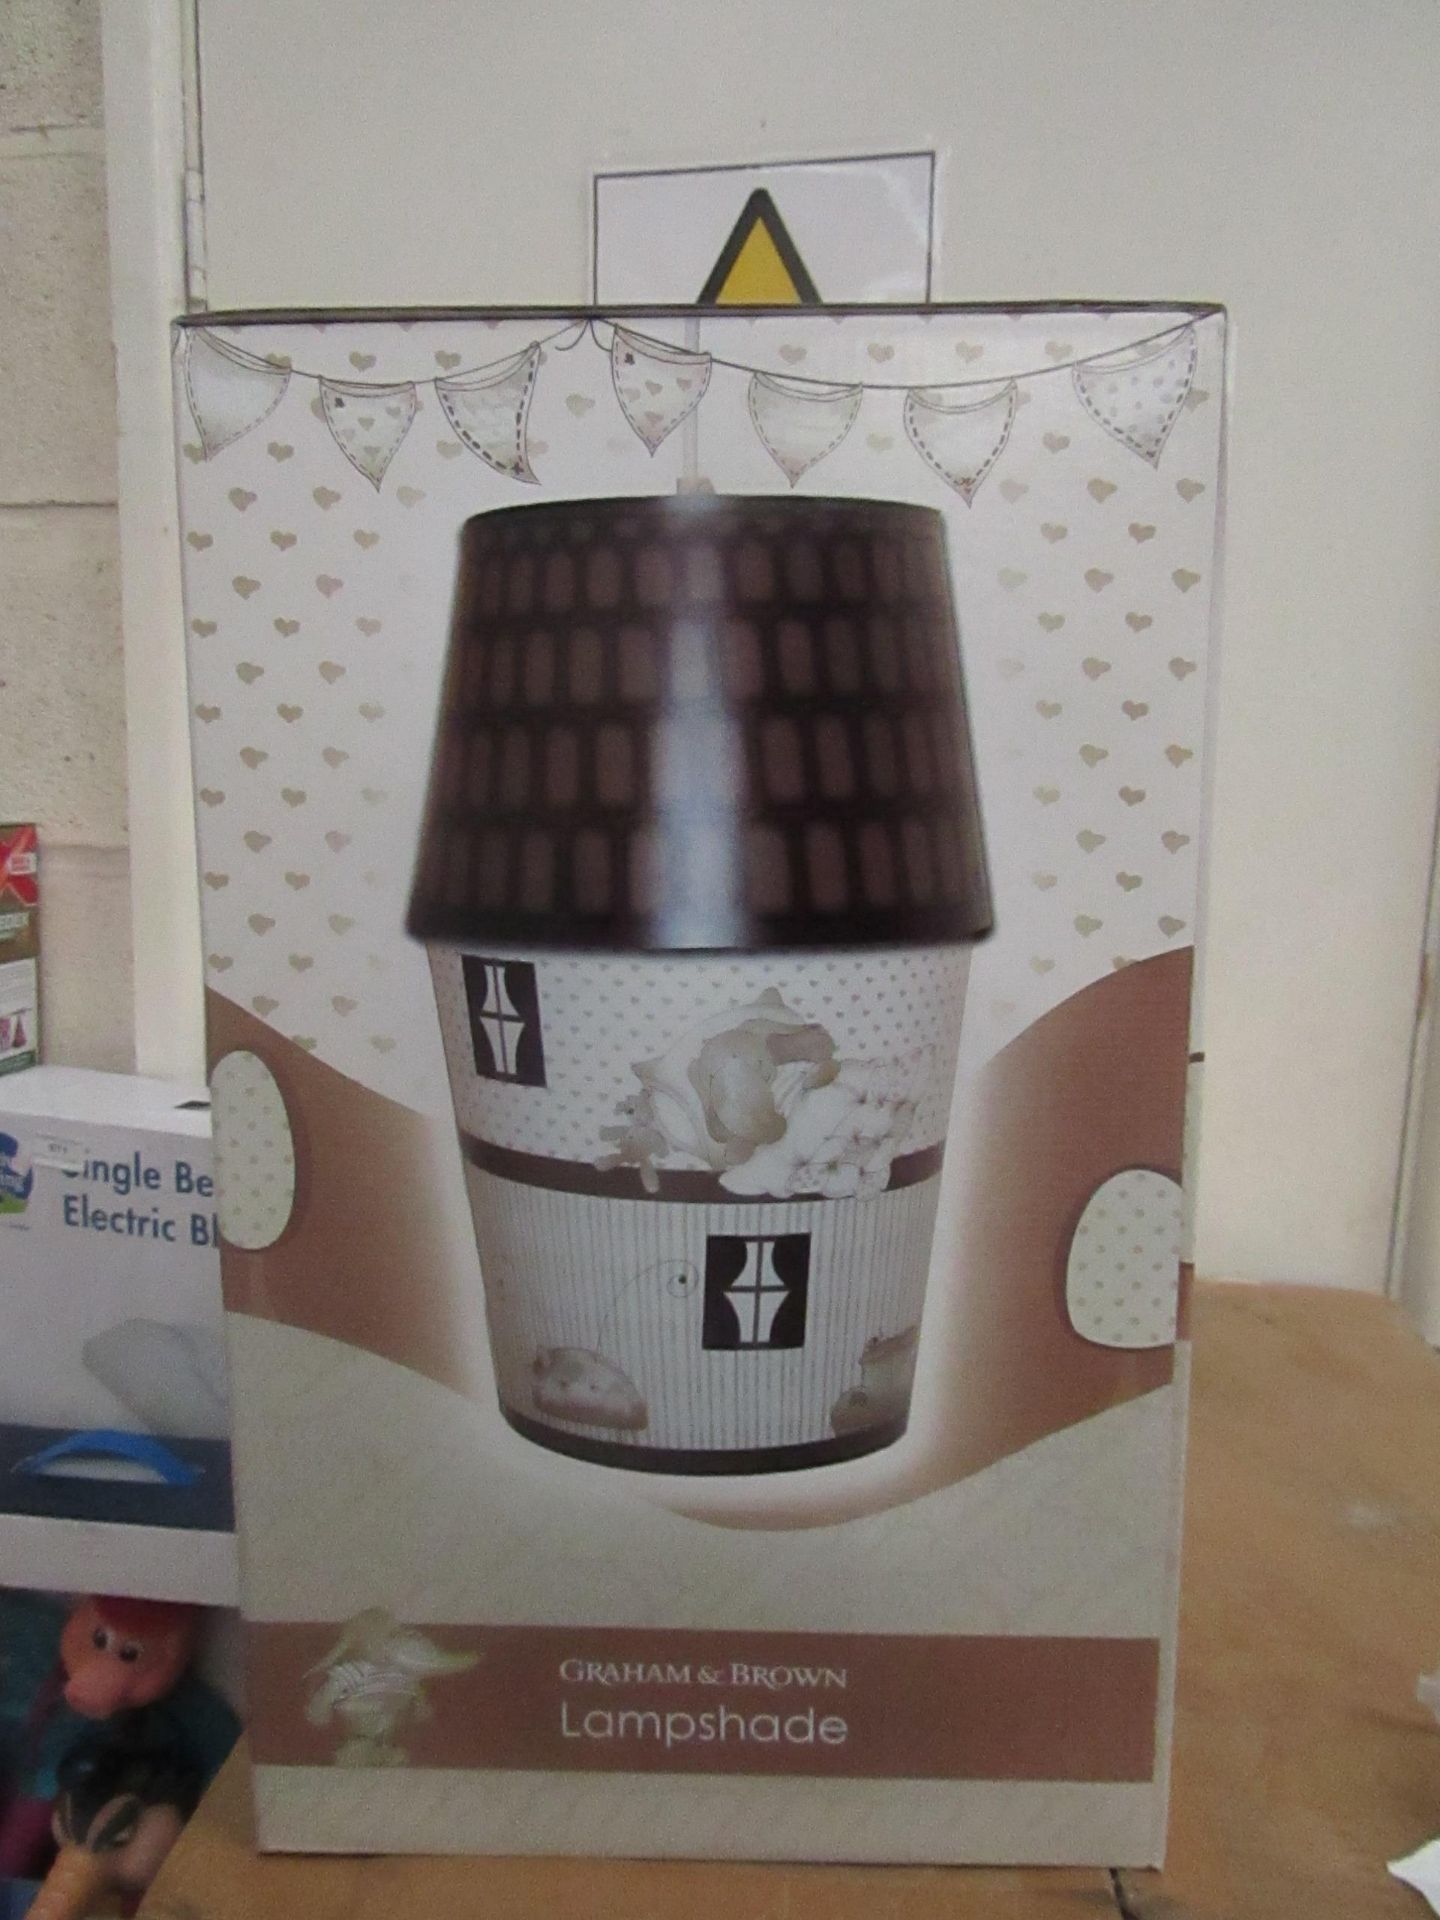 Grayham & Brown Lampshade, Unchecked & Boxed